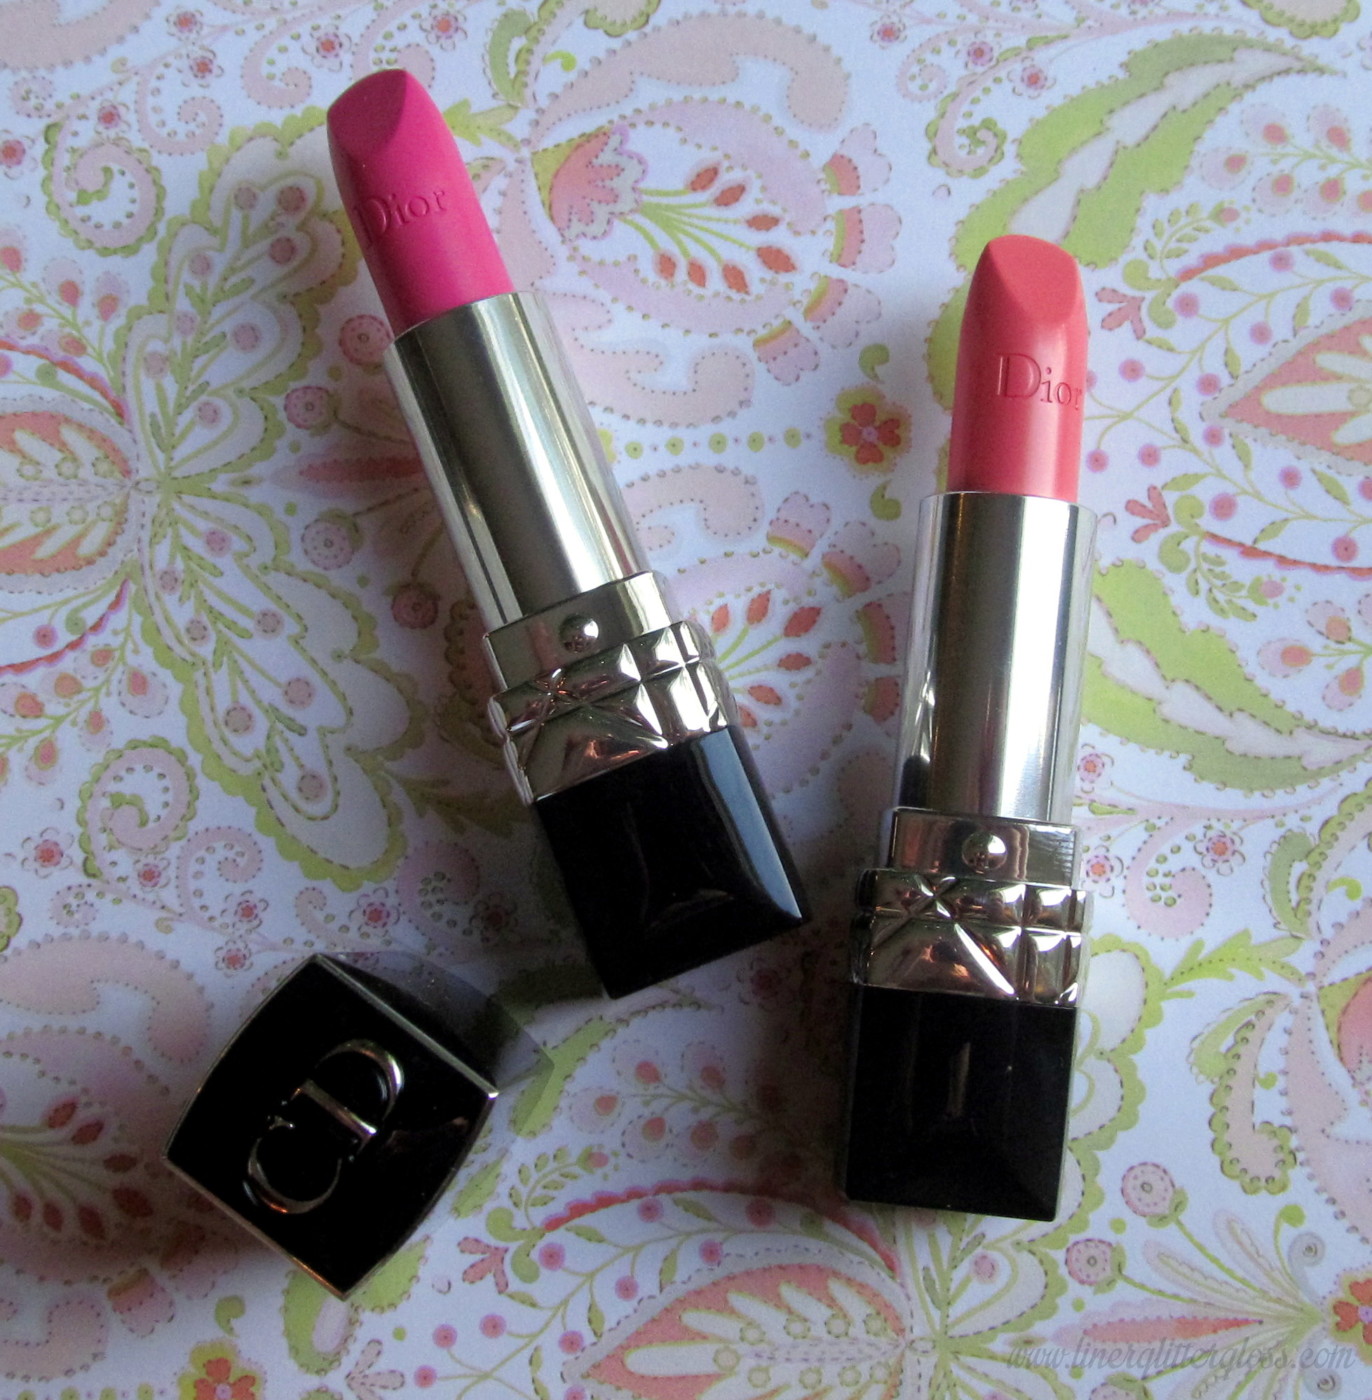 Dior Trianon Spring 2014 preview & swatches